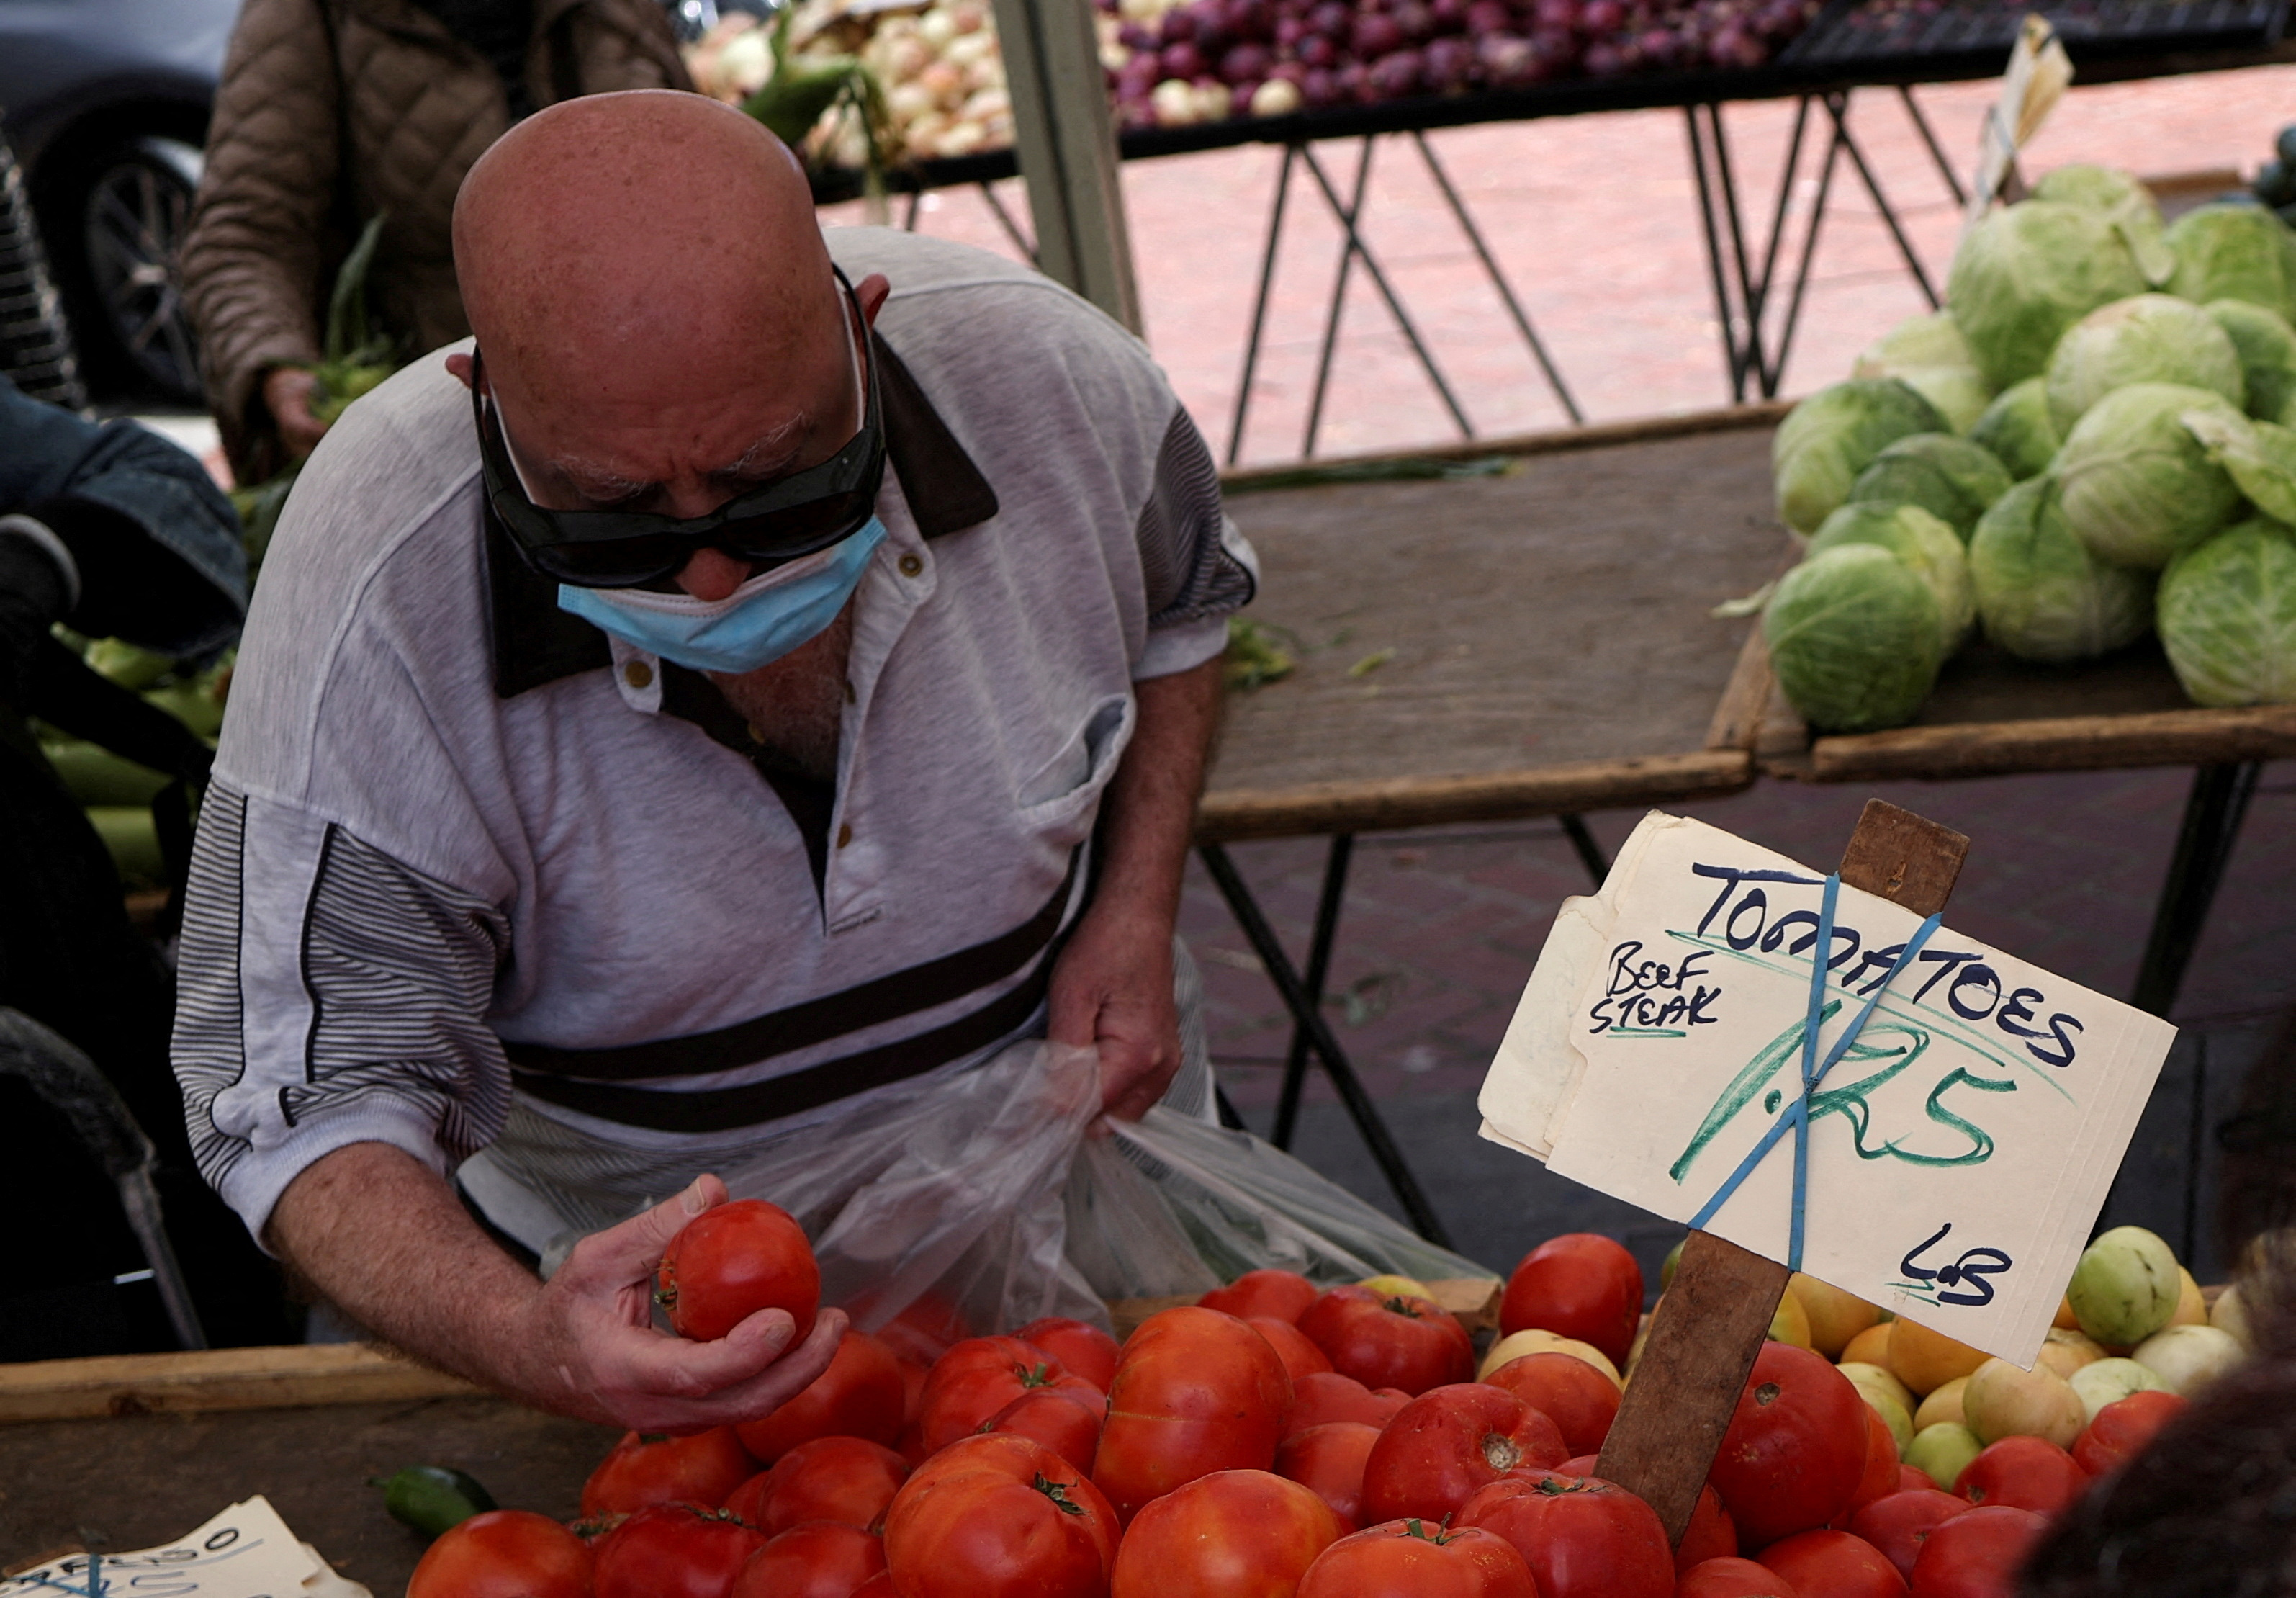 A resident buys food at a local market, in downtown San Francisco, California